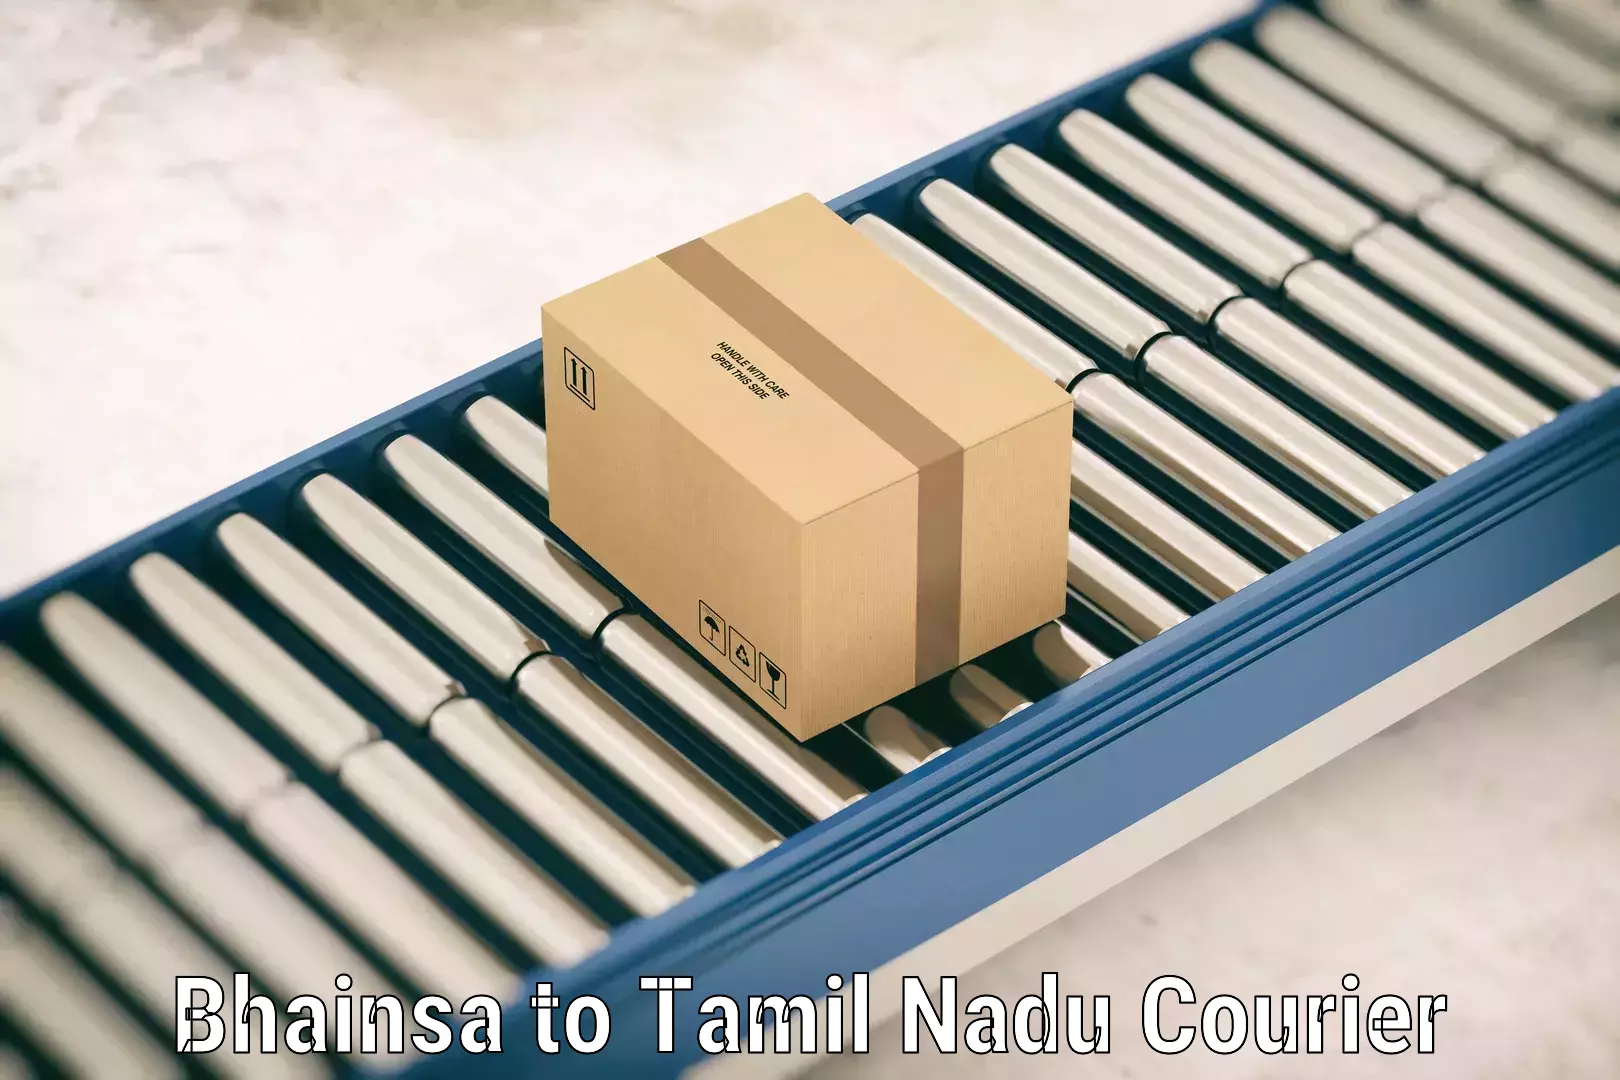 Personal effects shipping Bhainsa to Chennai Port